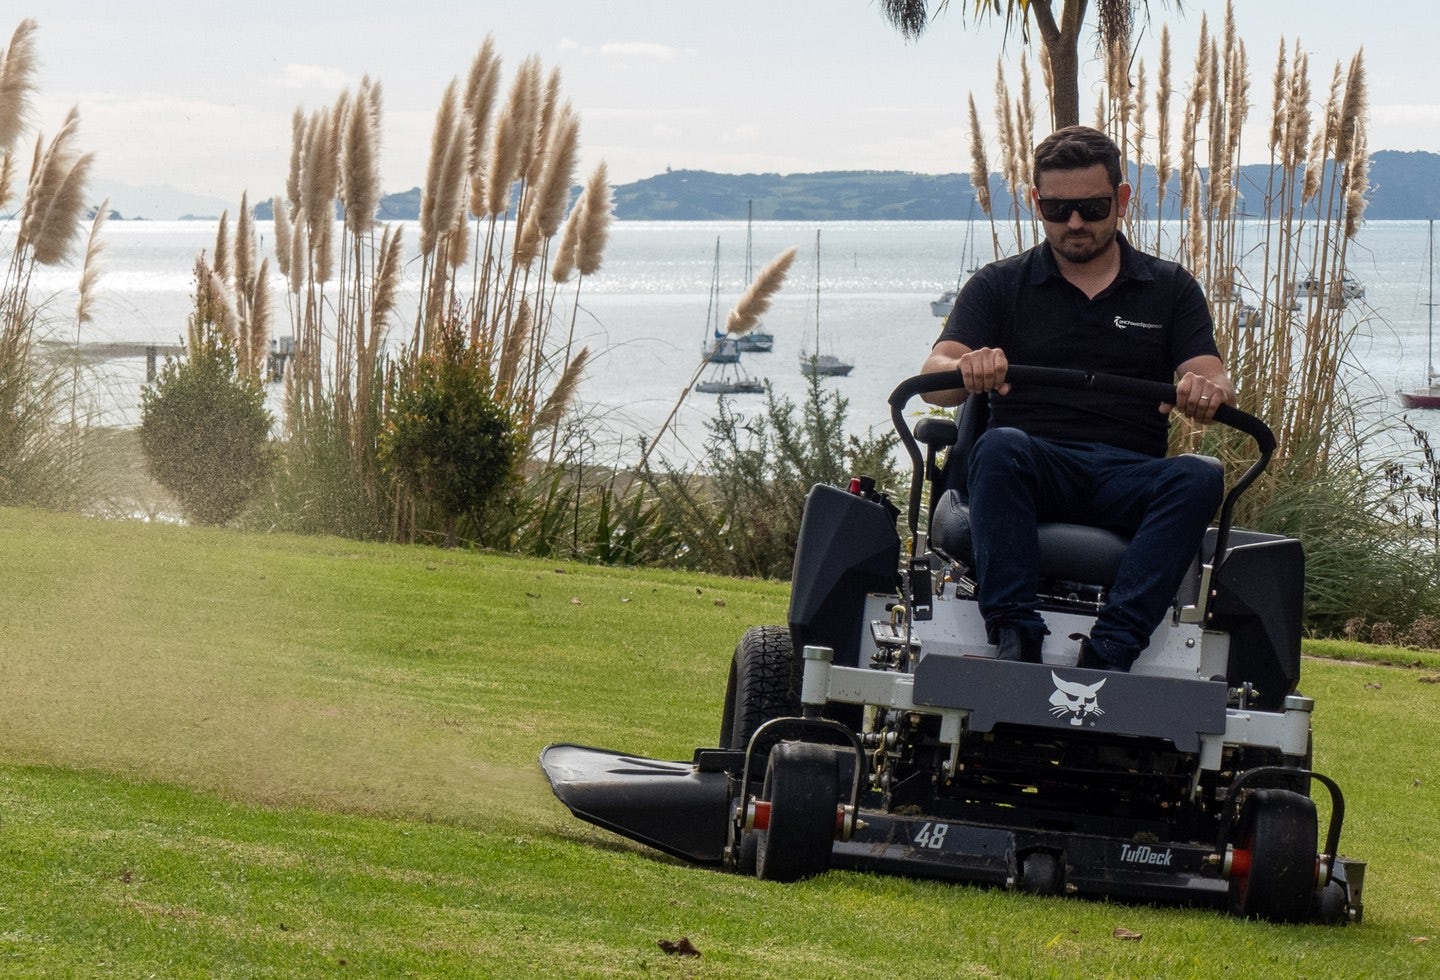 Person operating Bobcat mower by the sea